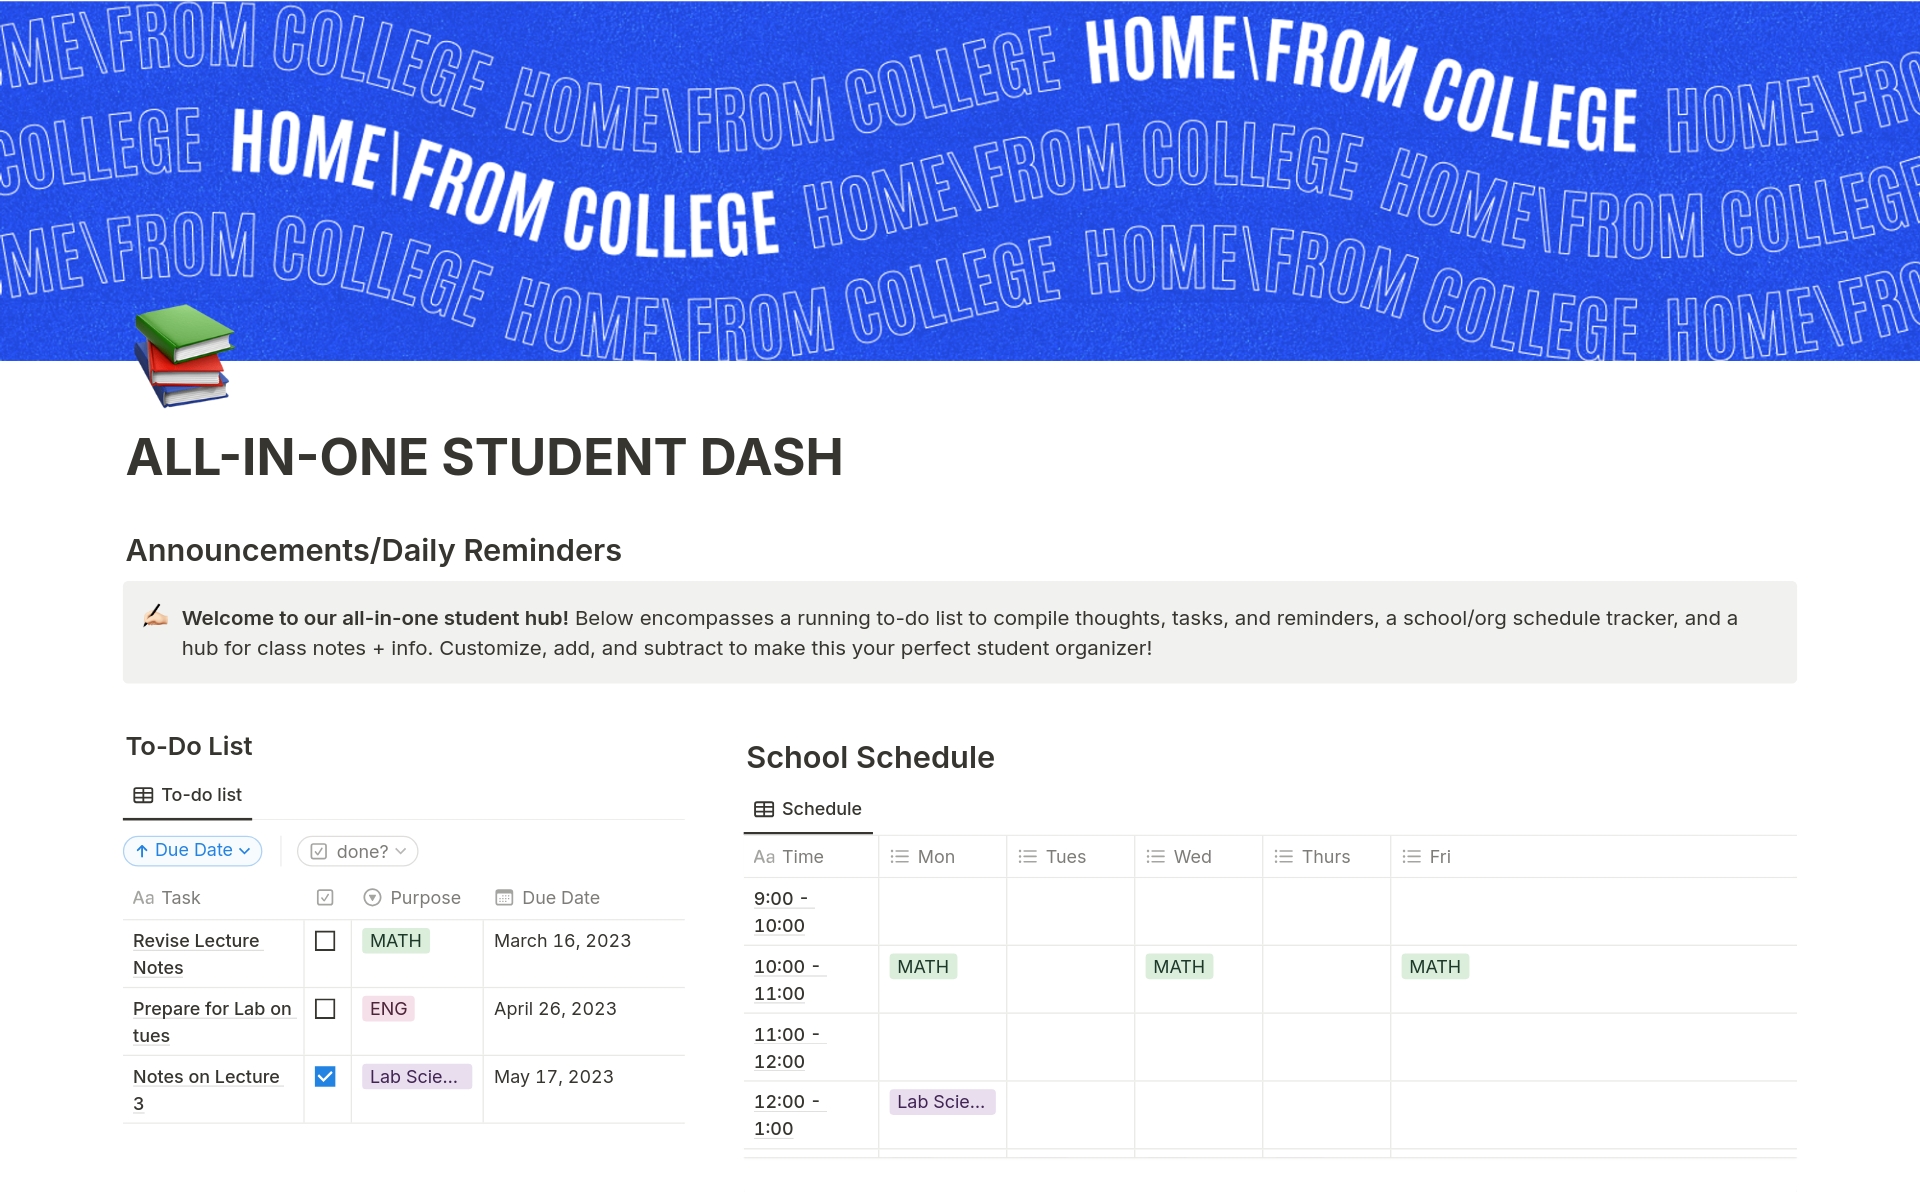 Our student dashboard offers a comprehensive organizational tool for students, combining features such as class schedules, task lists, assignment trackers, and goal setting functionalities. 